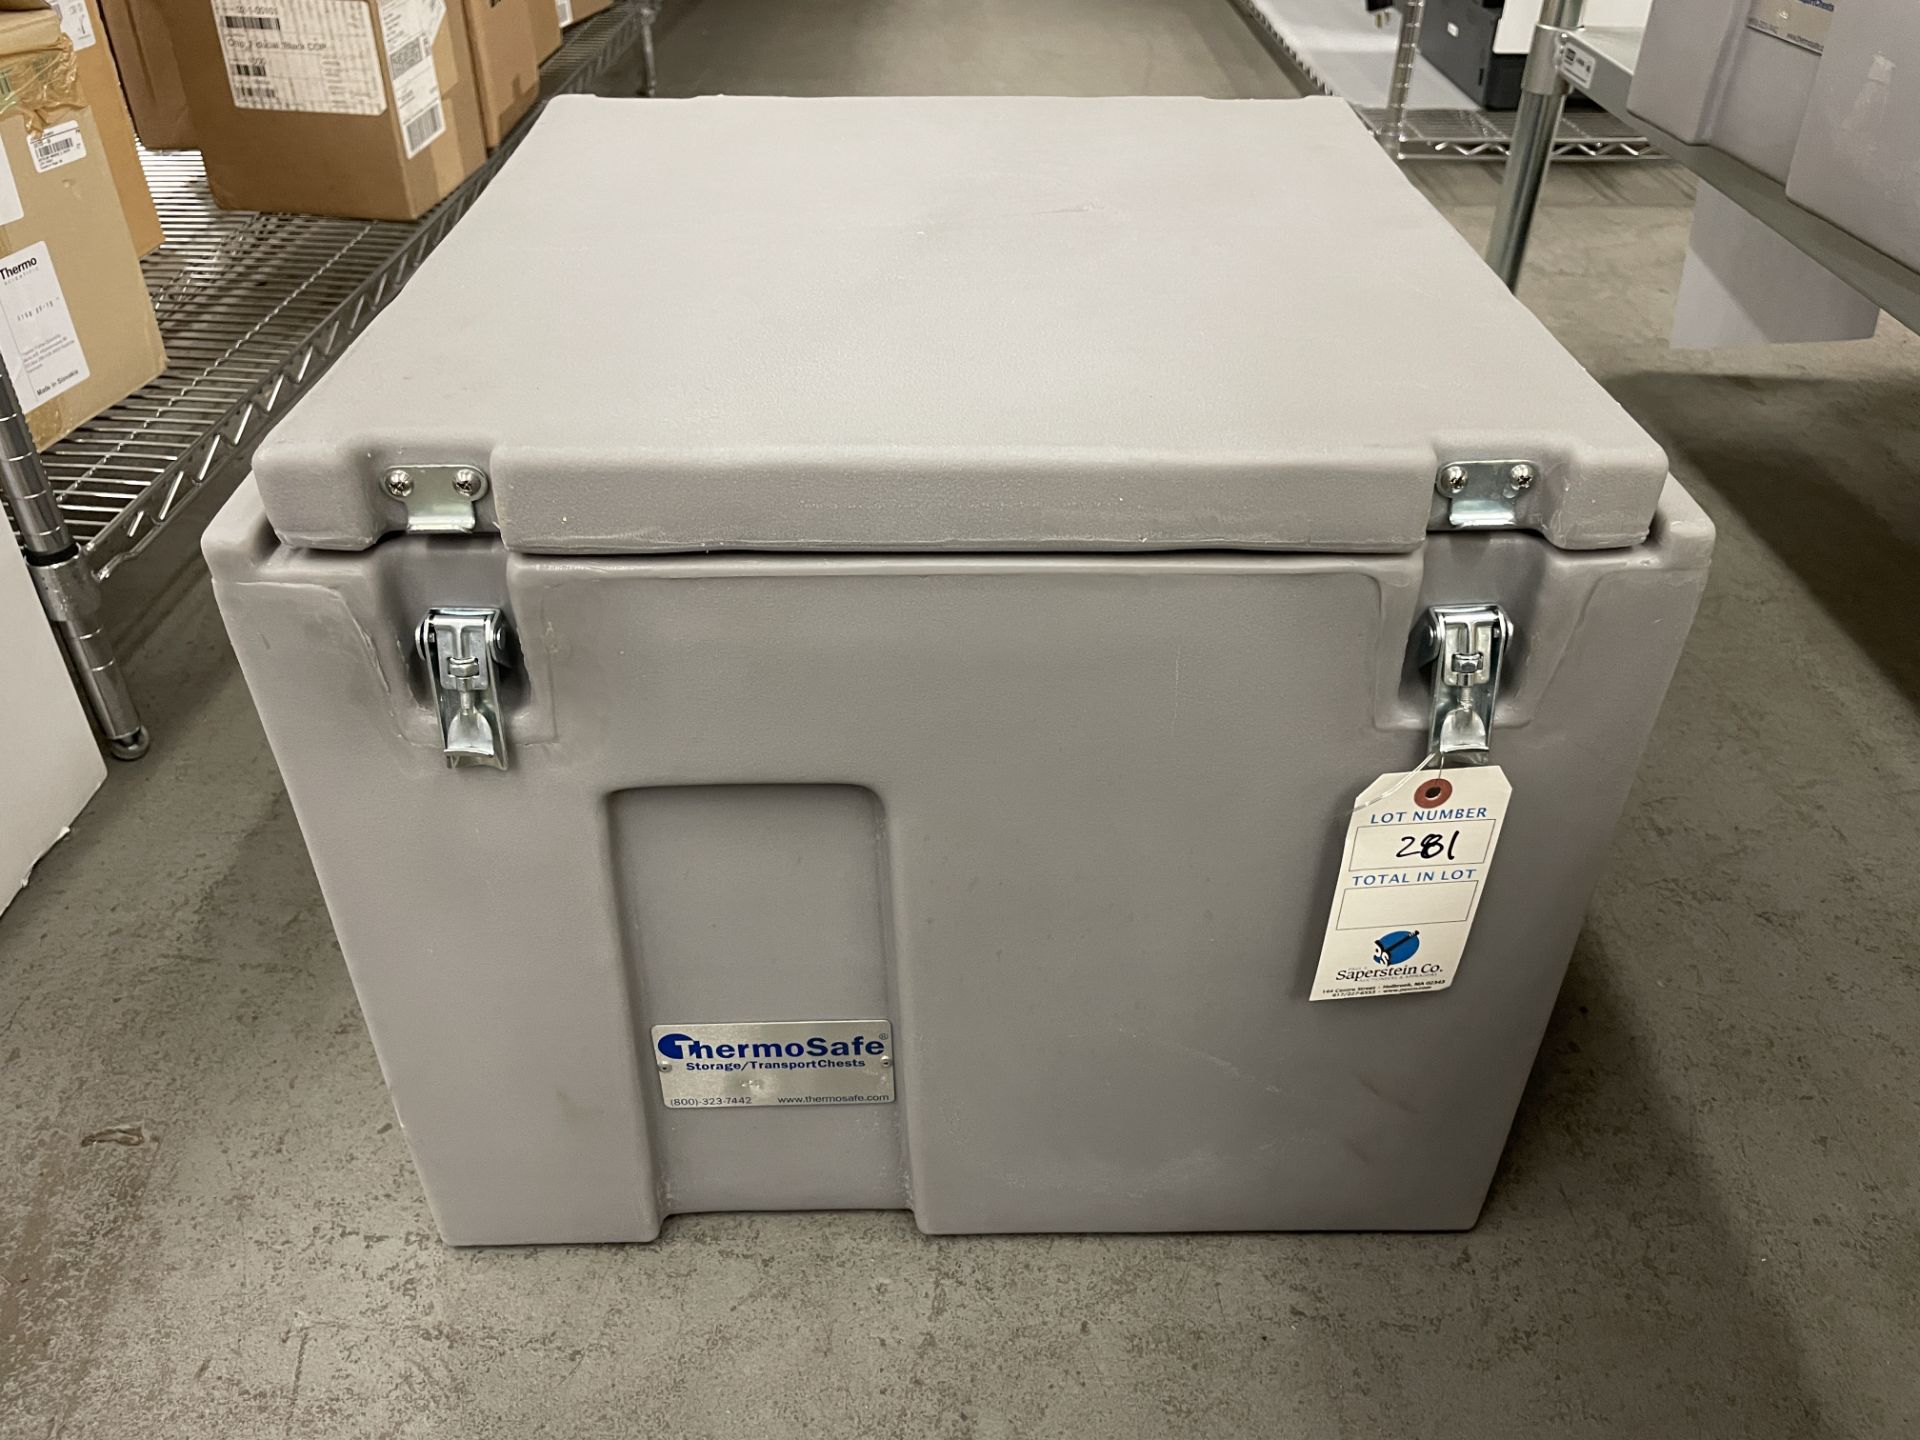 Thermo Safe Storage/ Transport Chest 20" x 19" x 17"H